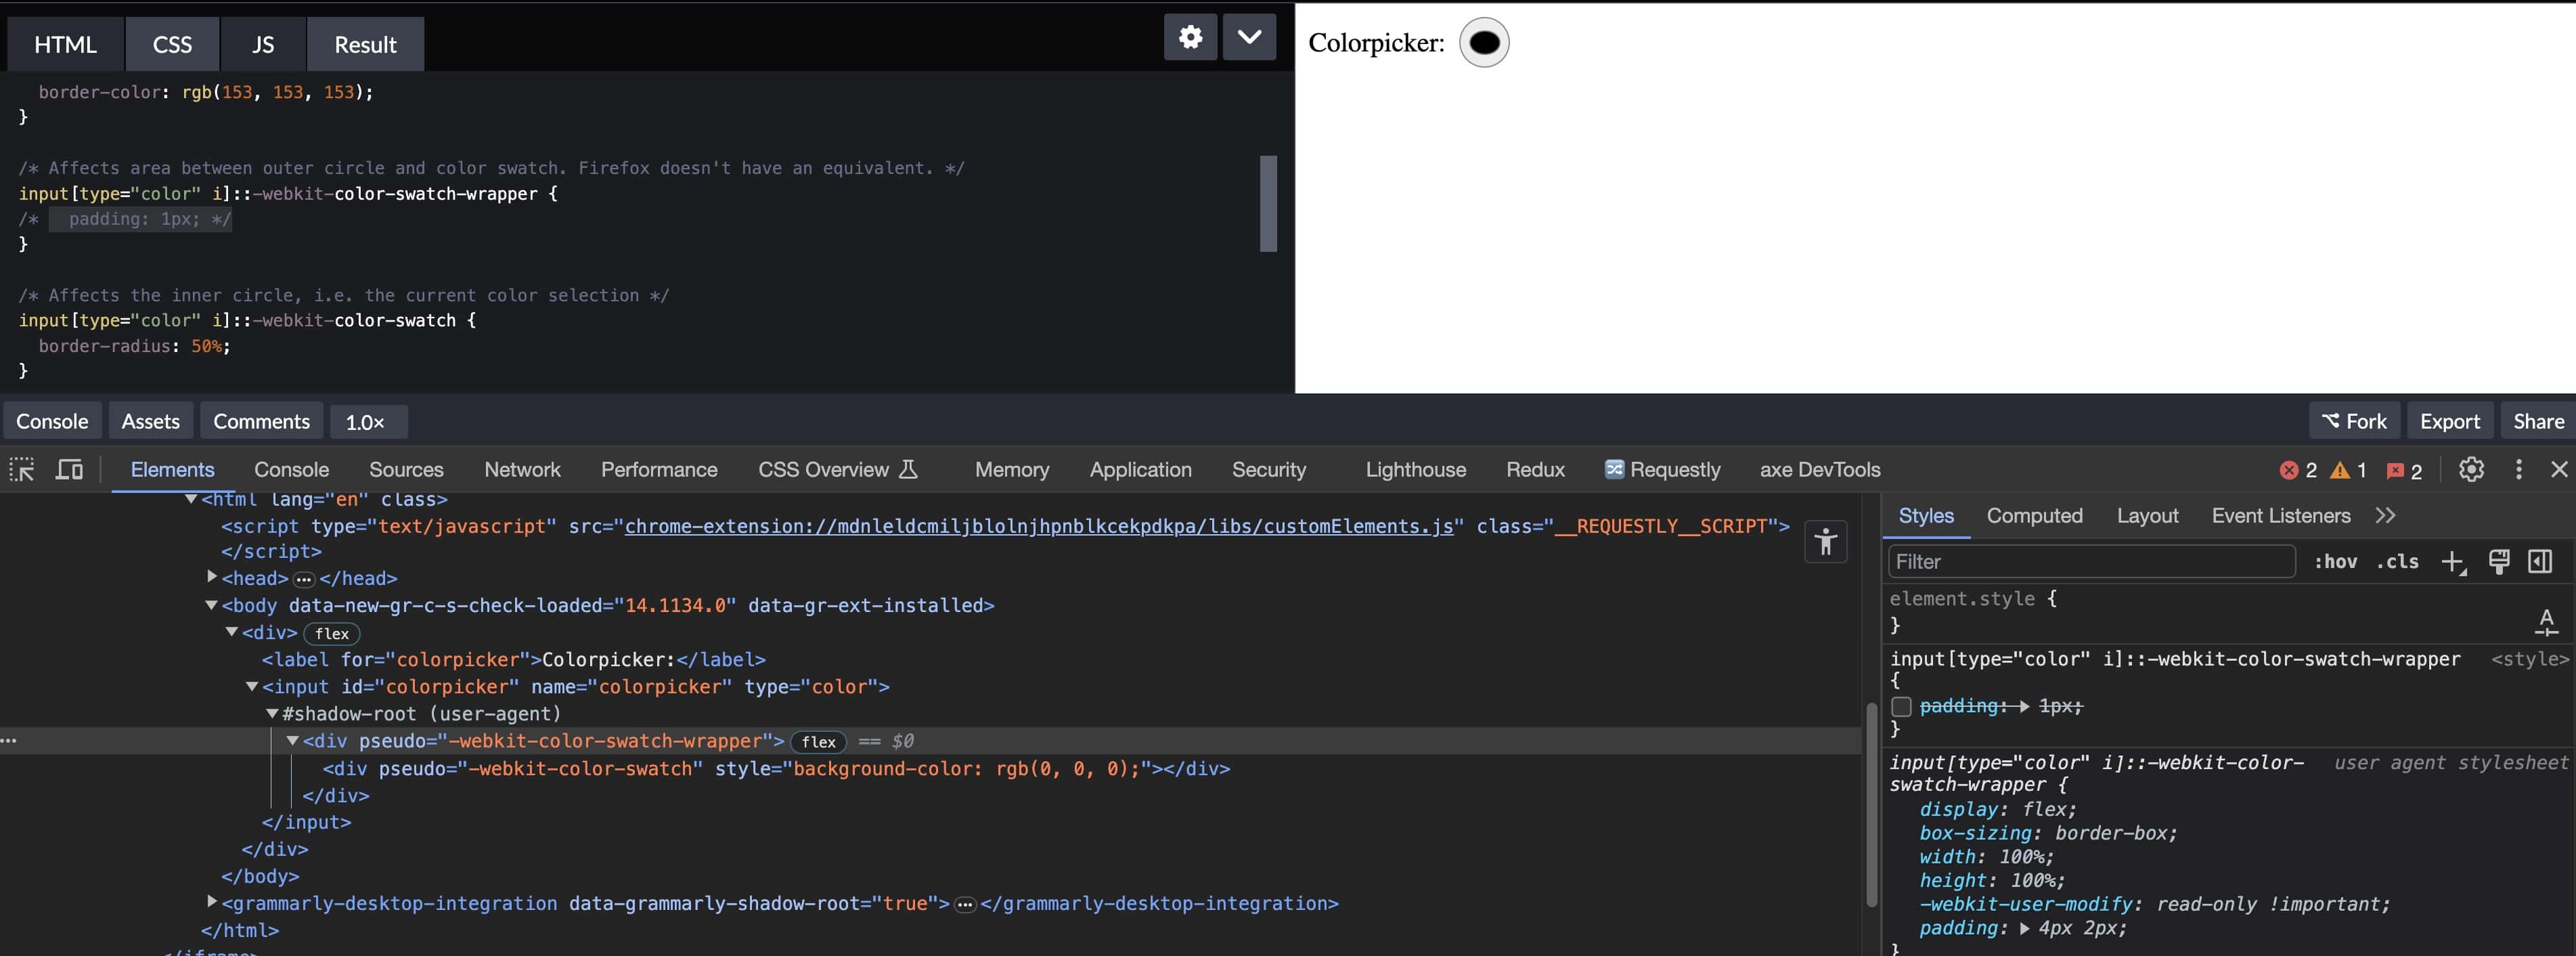 Screenshot of color input in Chrome with default padding for -webkit-color-swatch-wrapper pseudoclass